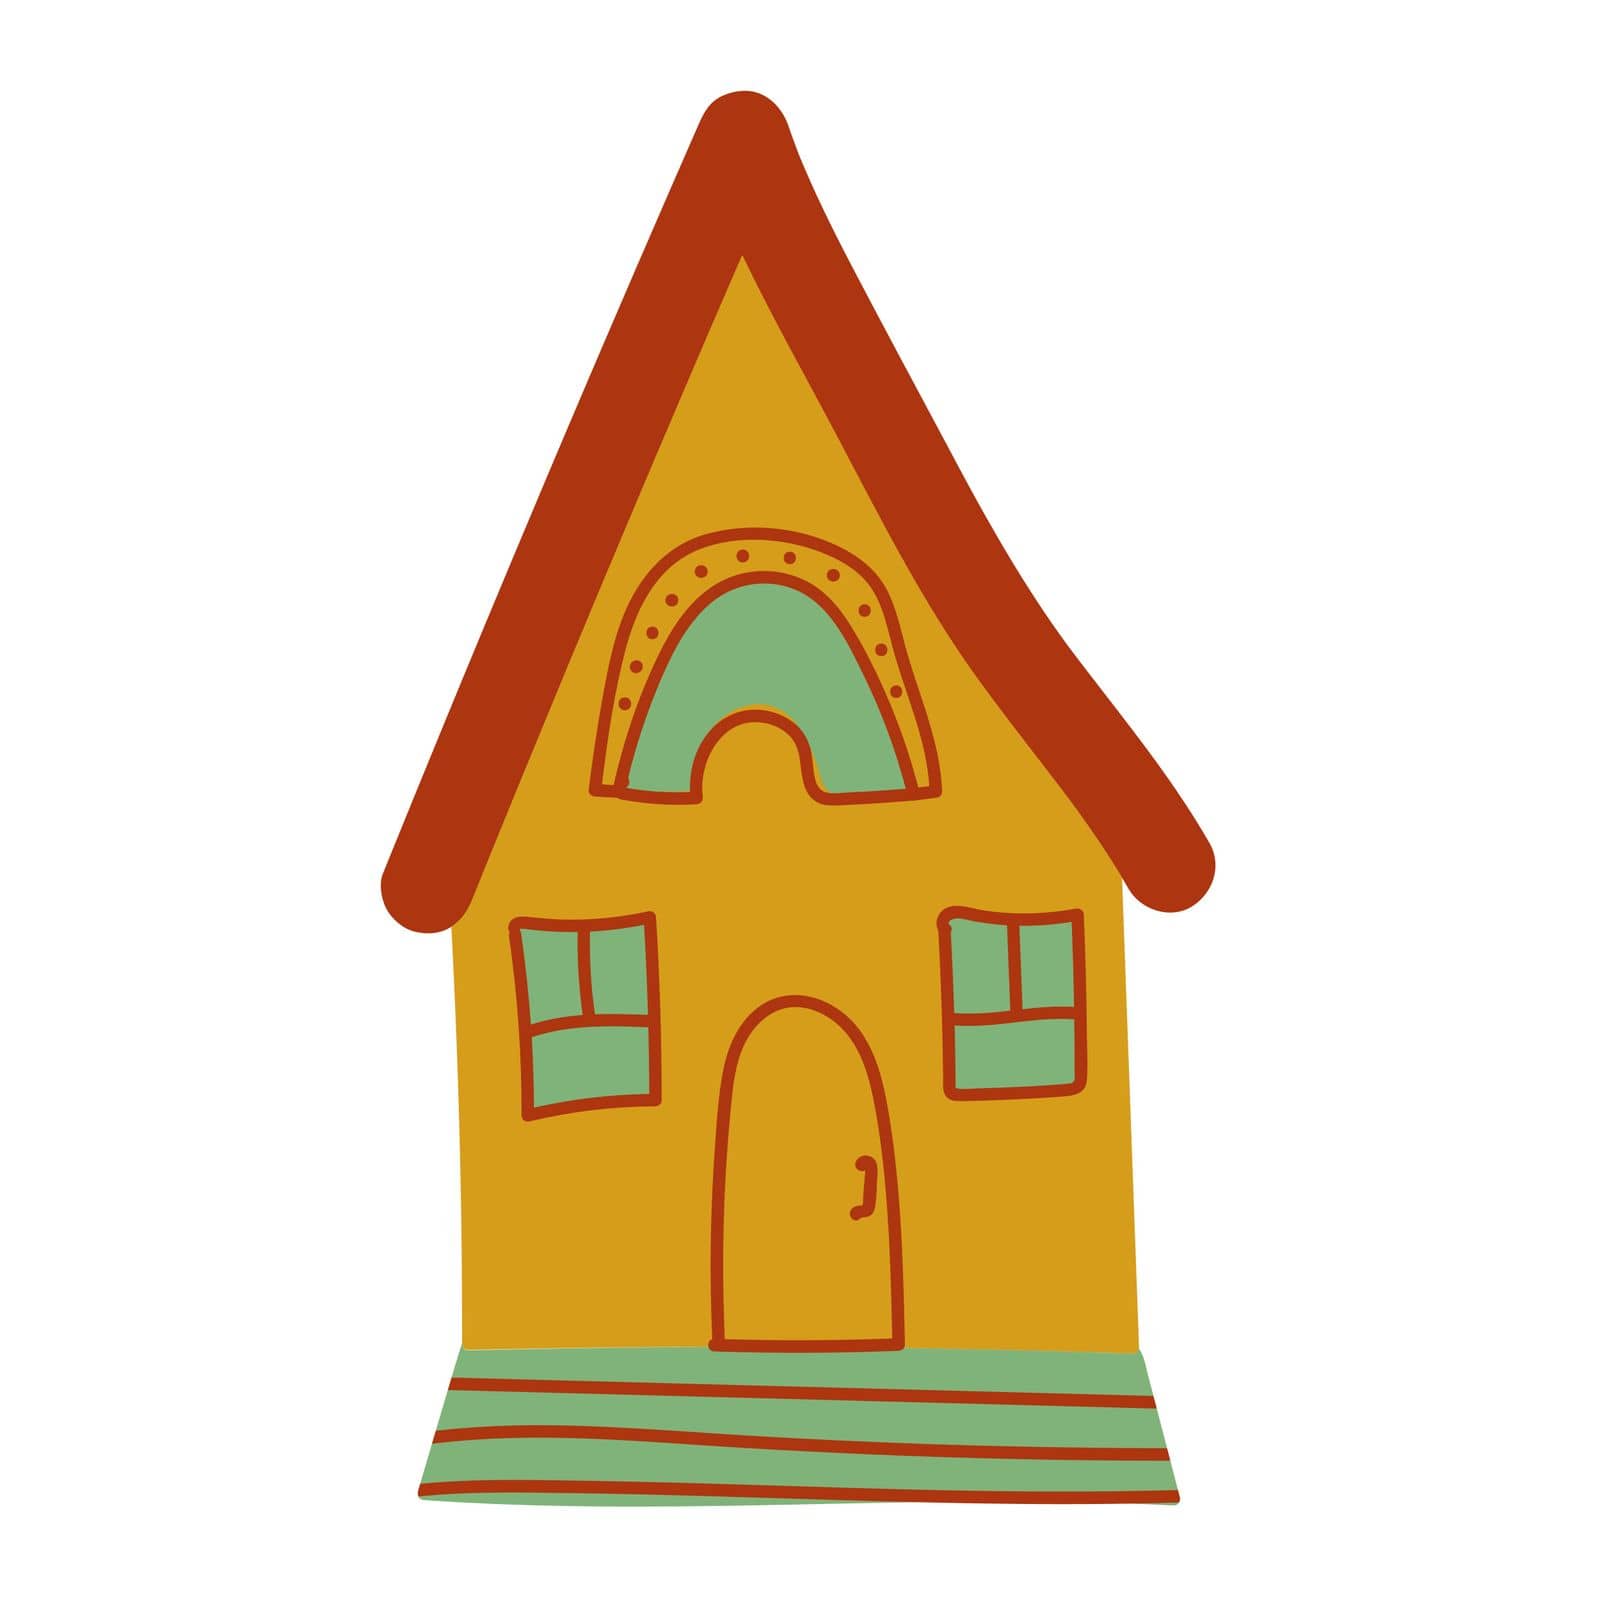 Childish house in simple hand drawn style. Colorful building of city or village. Vector handdrawn illustration isolated on white for kids design